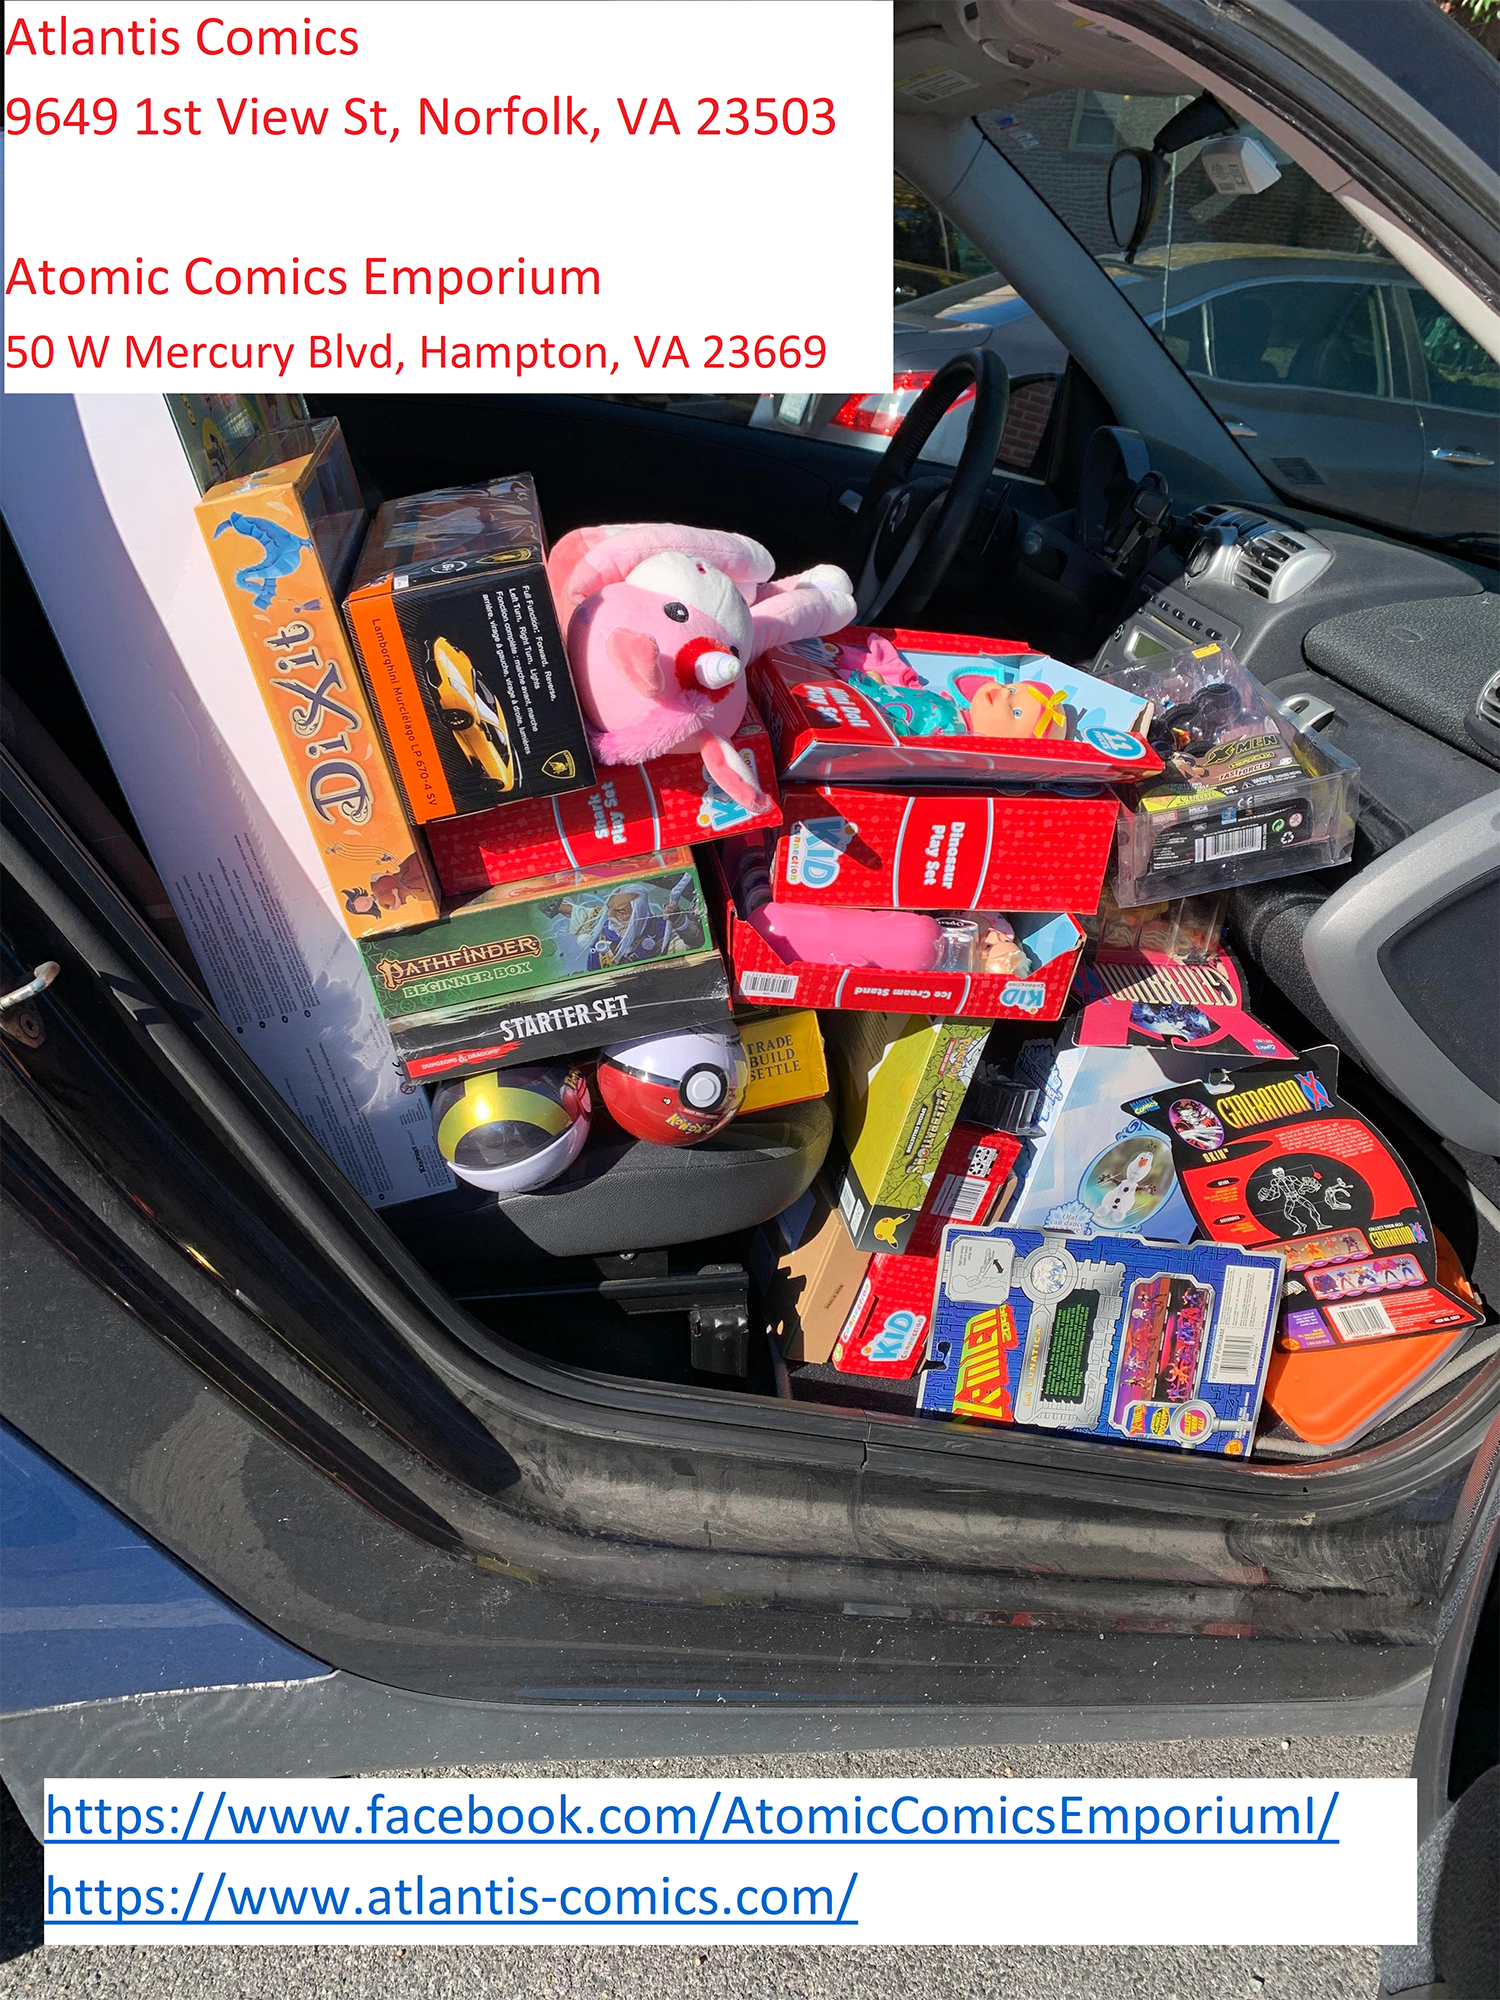 A pile of toys in the front seat of a car